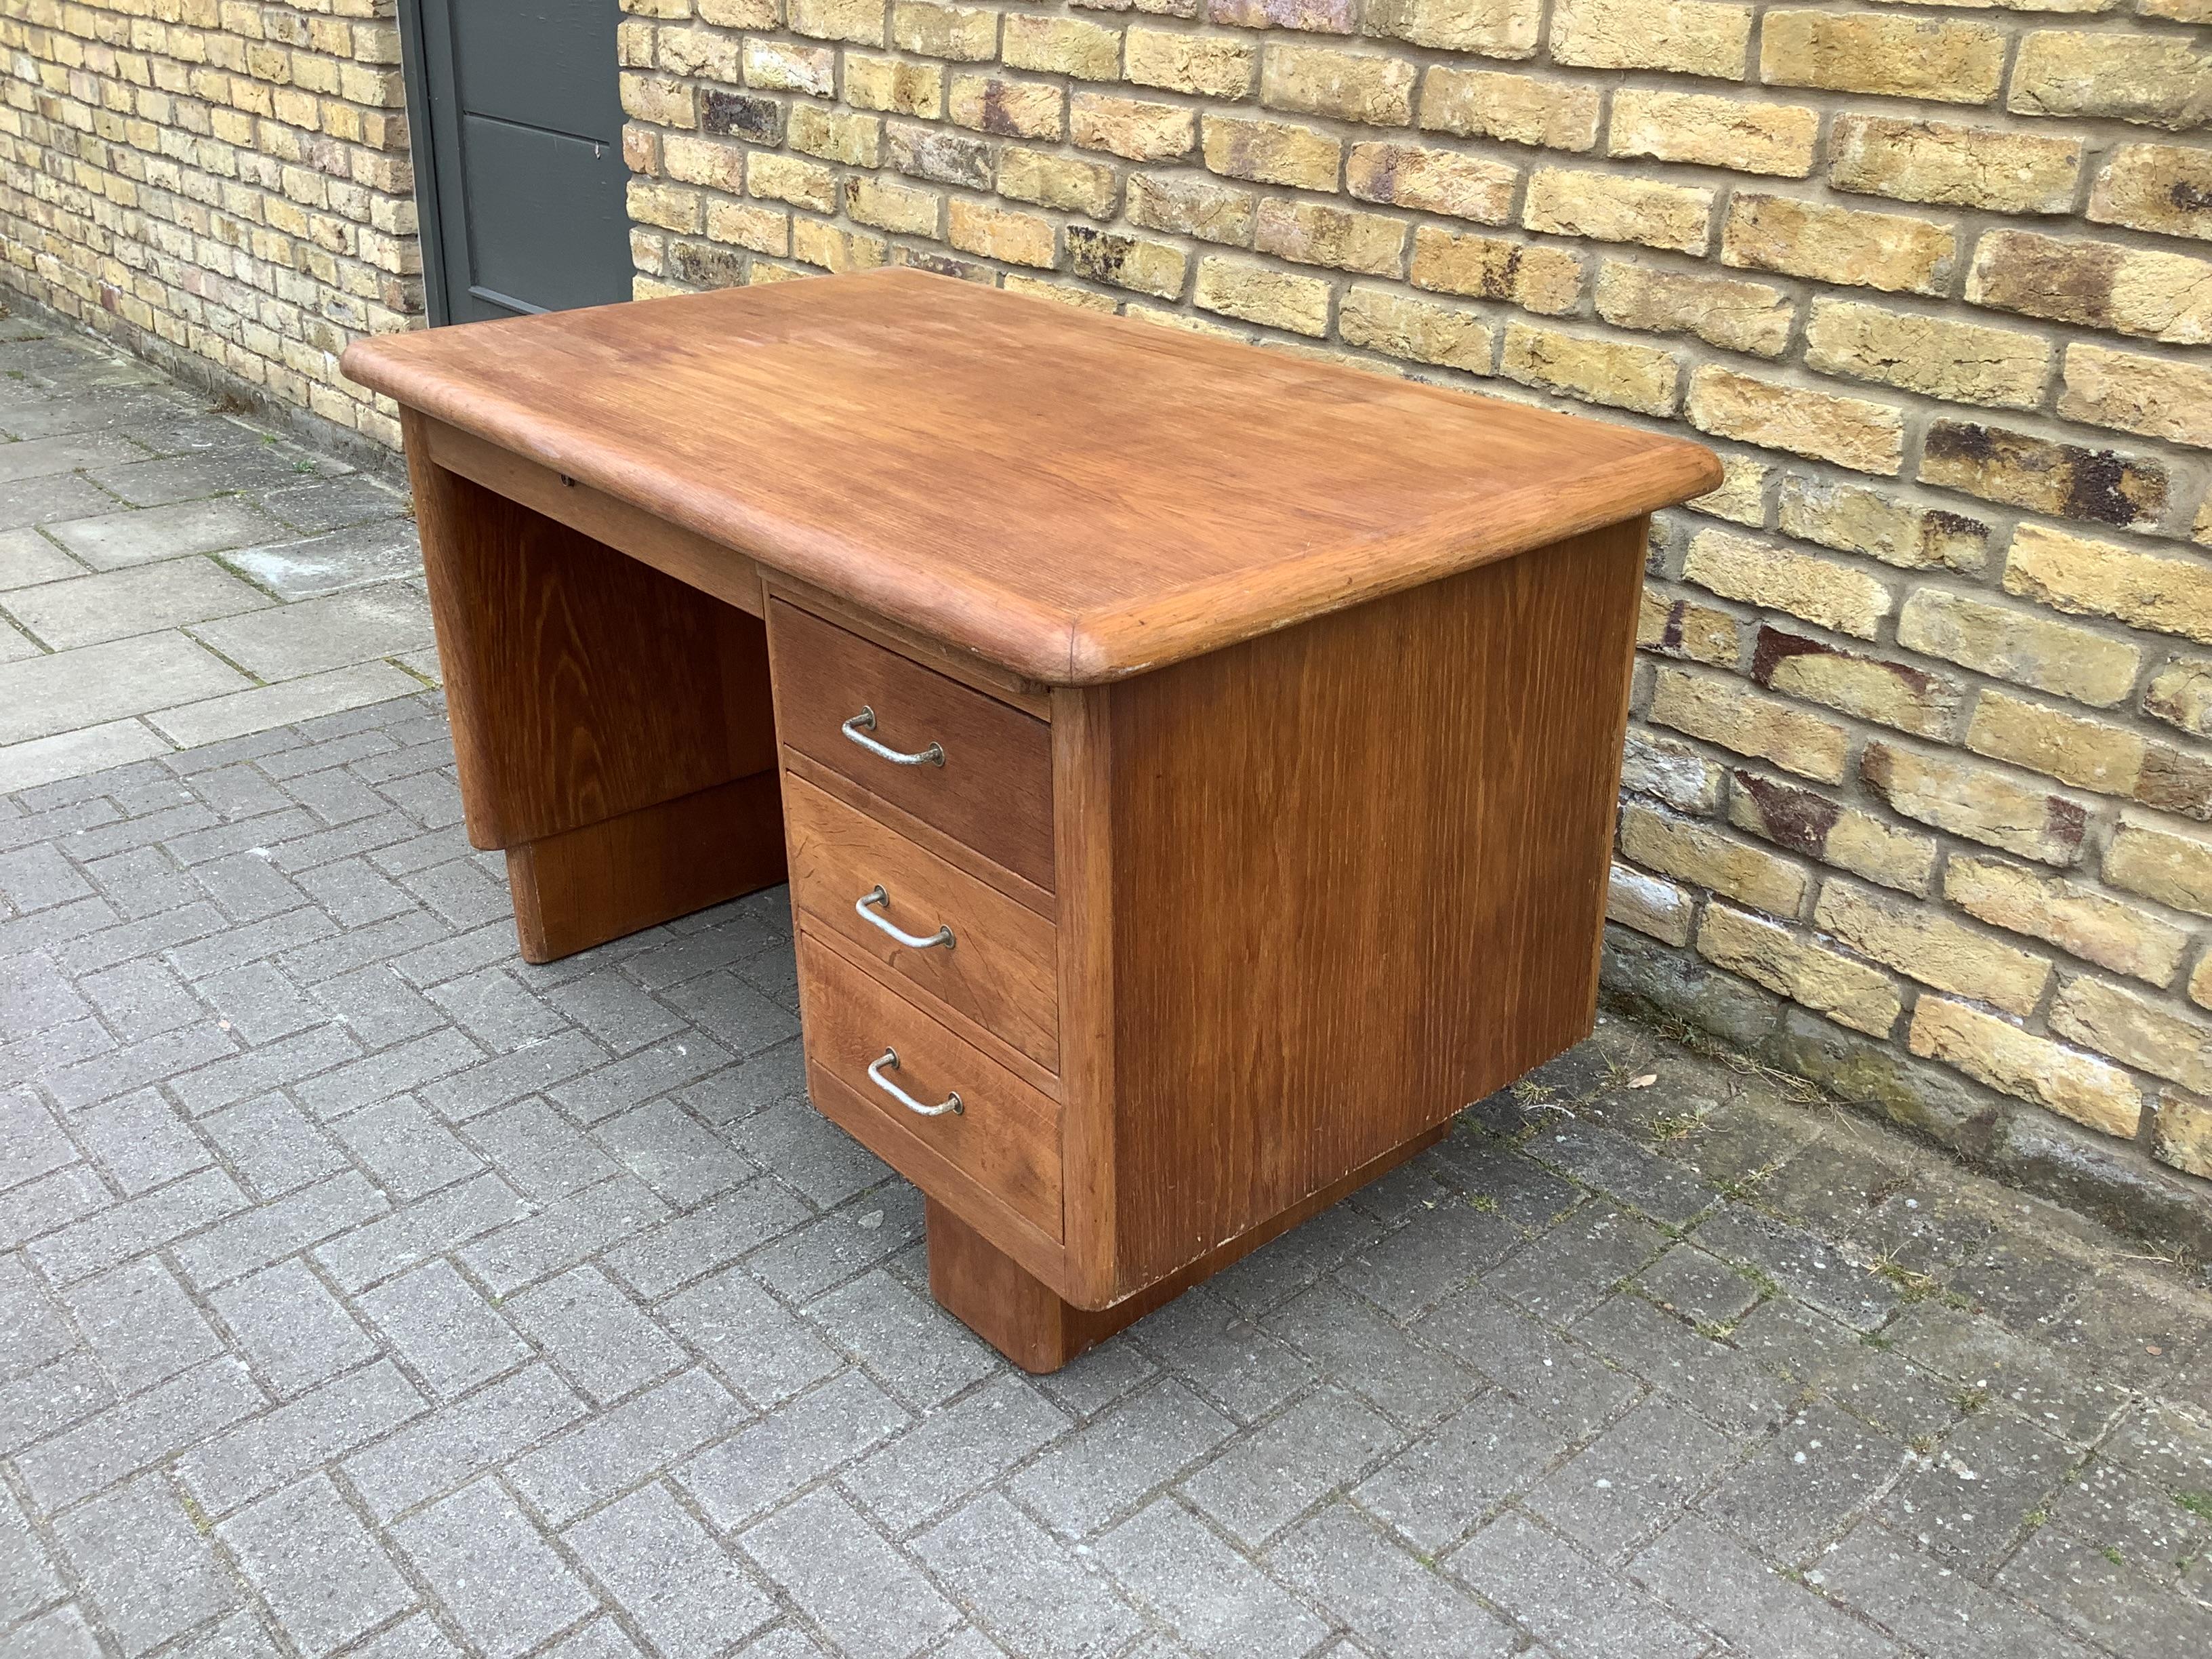 Solid oak Deco style French writing desk good work surface rounded curved shaped design. 4 storage draws with centre draw.